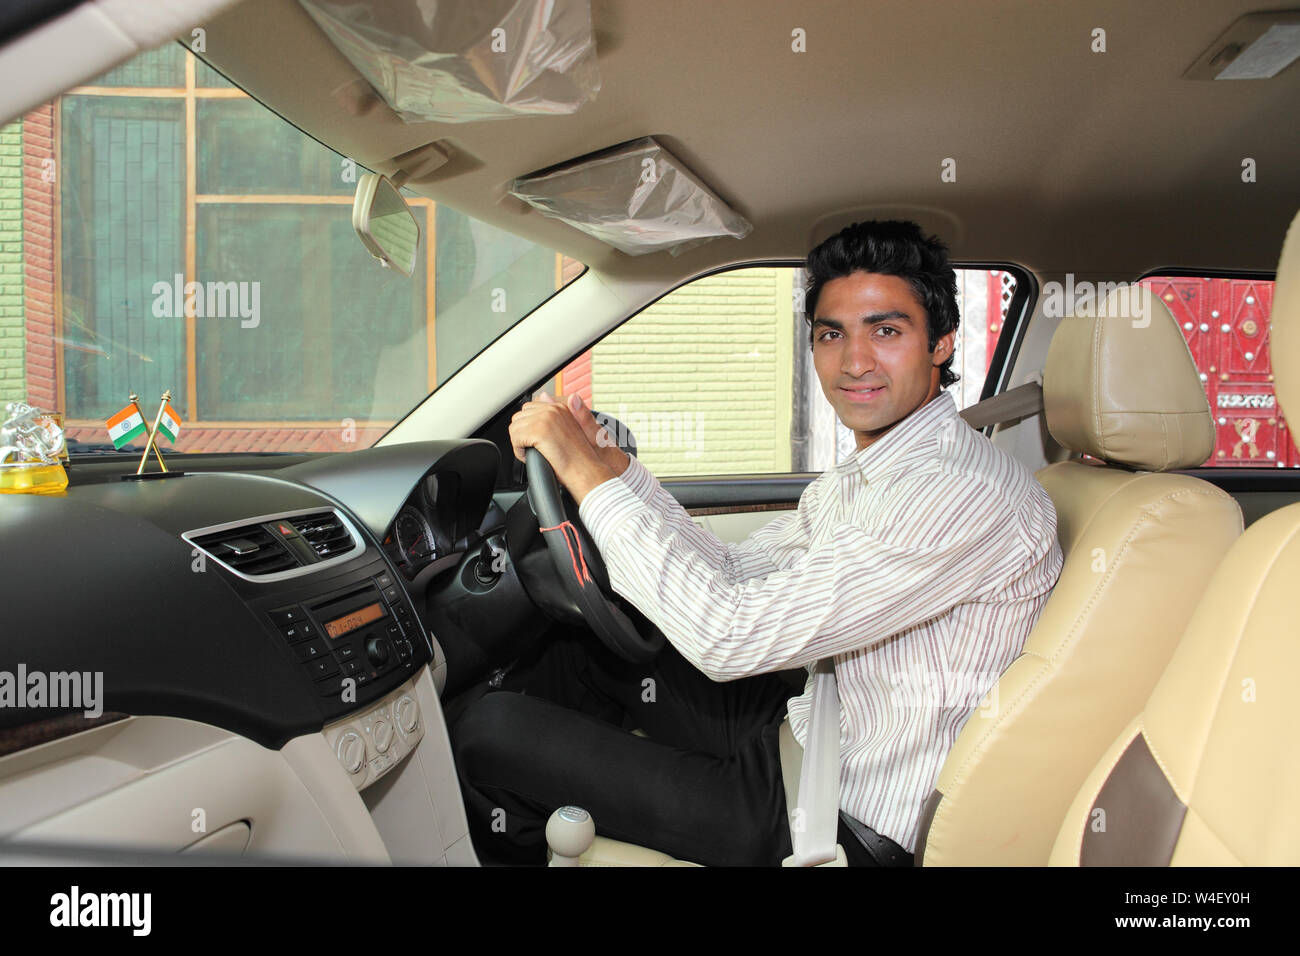 Portrait of a man driving a car Stock Photo